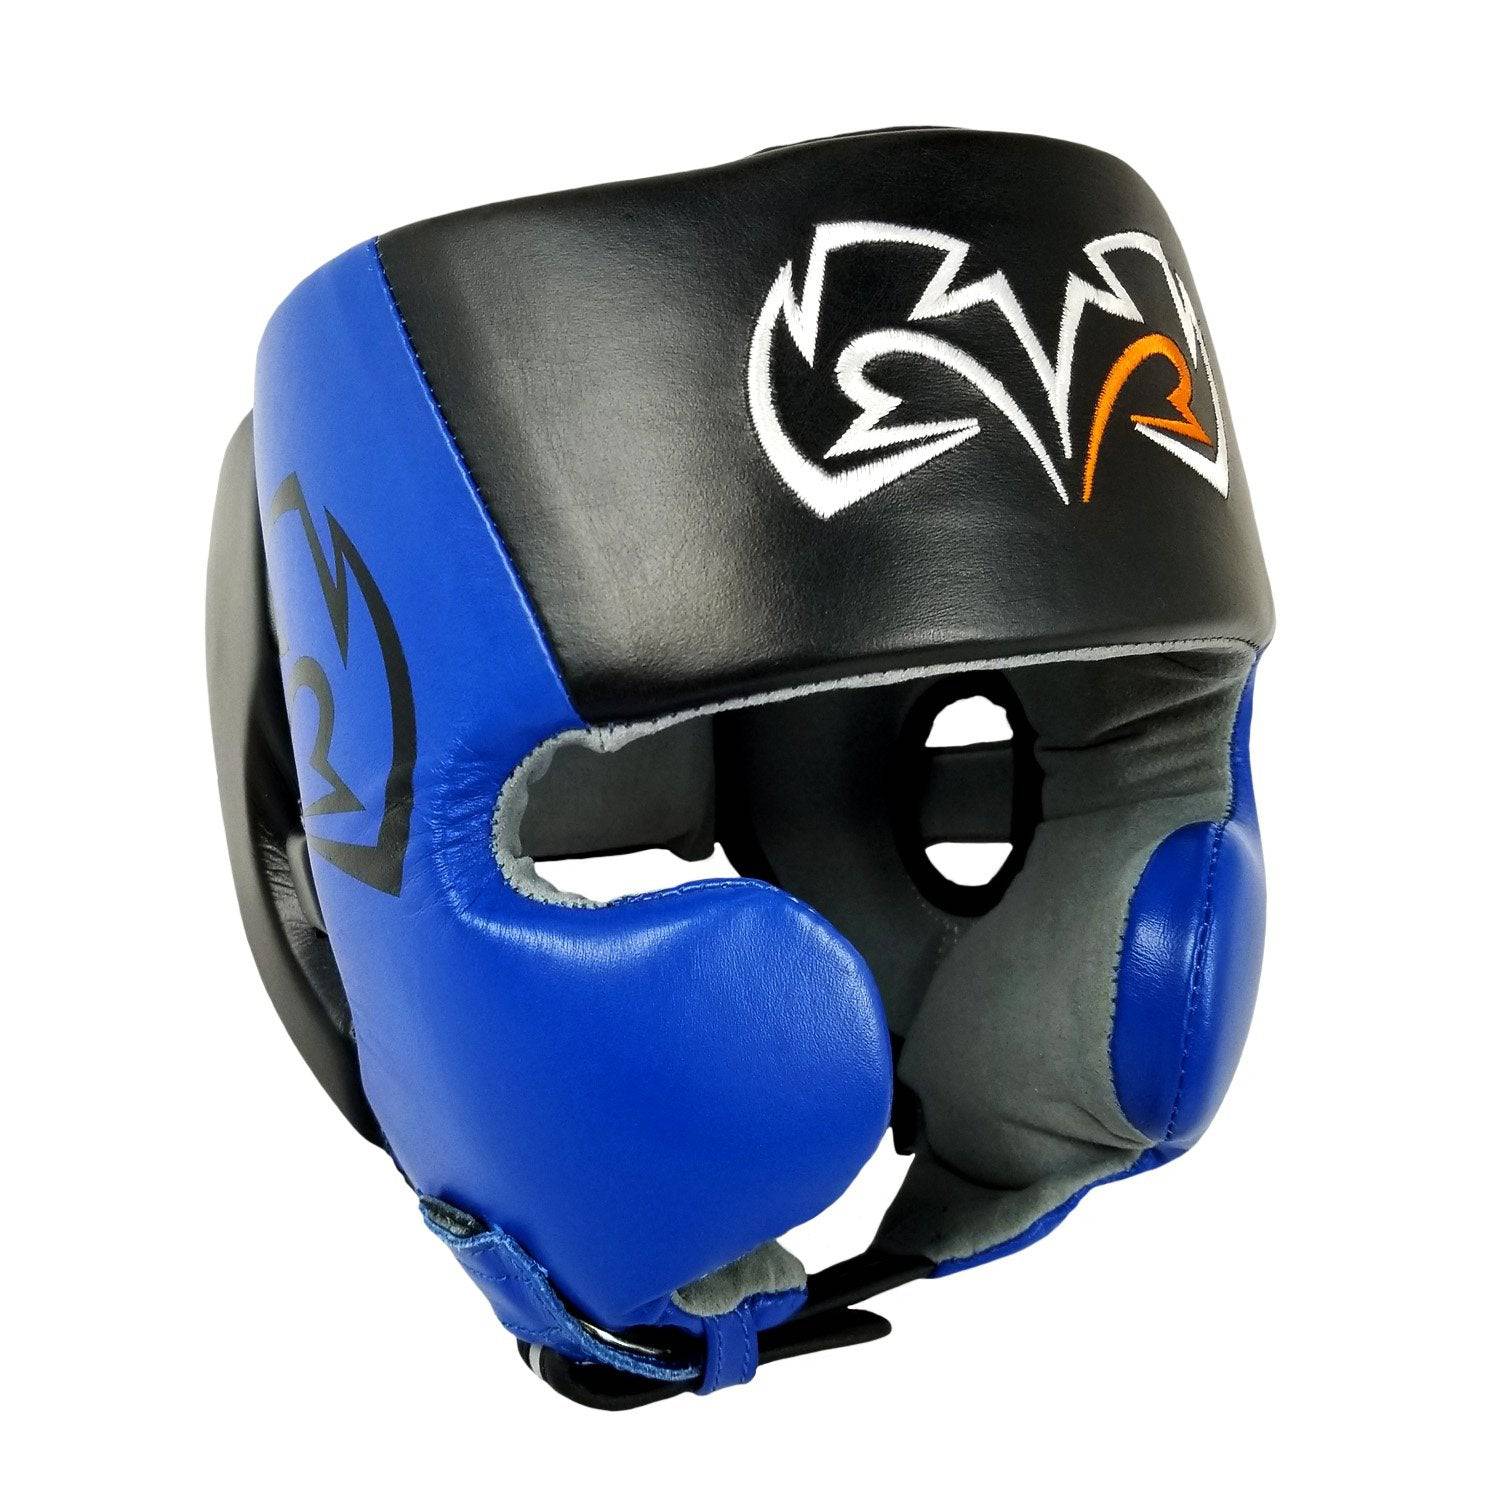 Rival | Training Headgear - RHG20 - XTC Fitness - Exercise Equipment Superstore - Canada - Head Gear